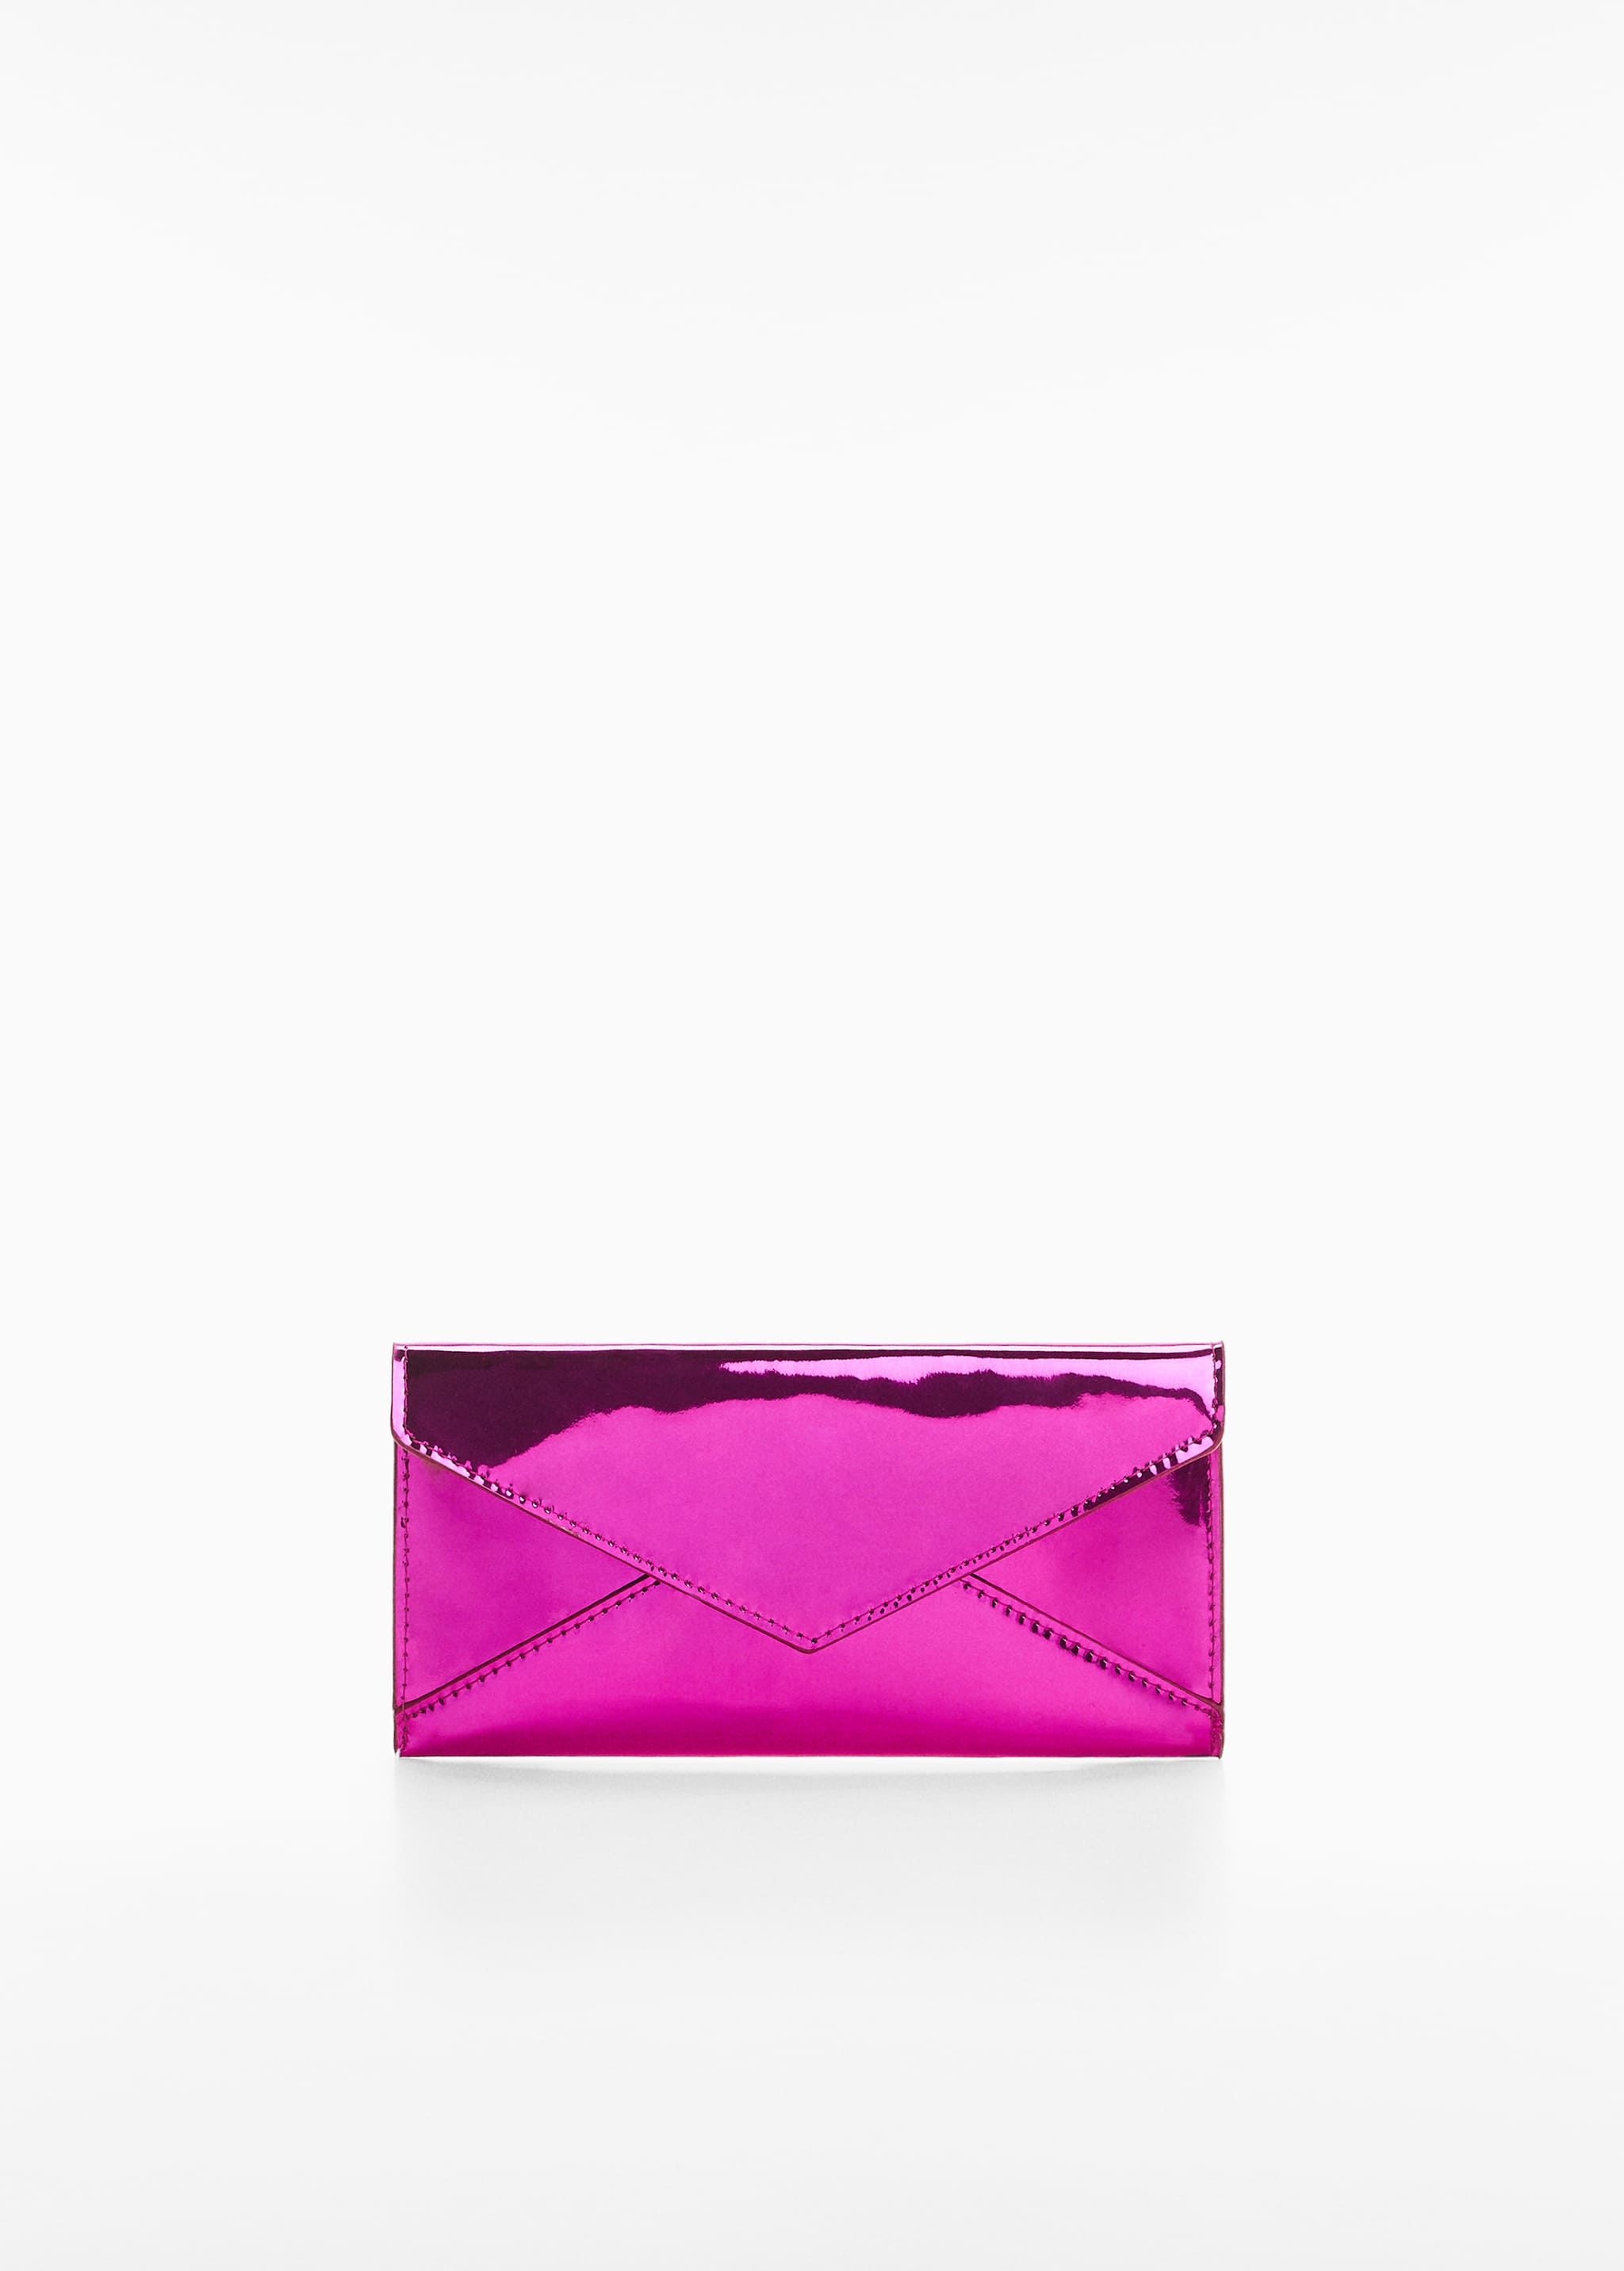 Metallic wallet with flap - Article without model